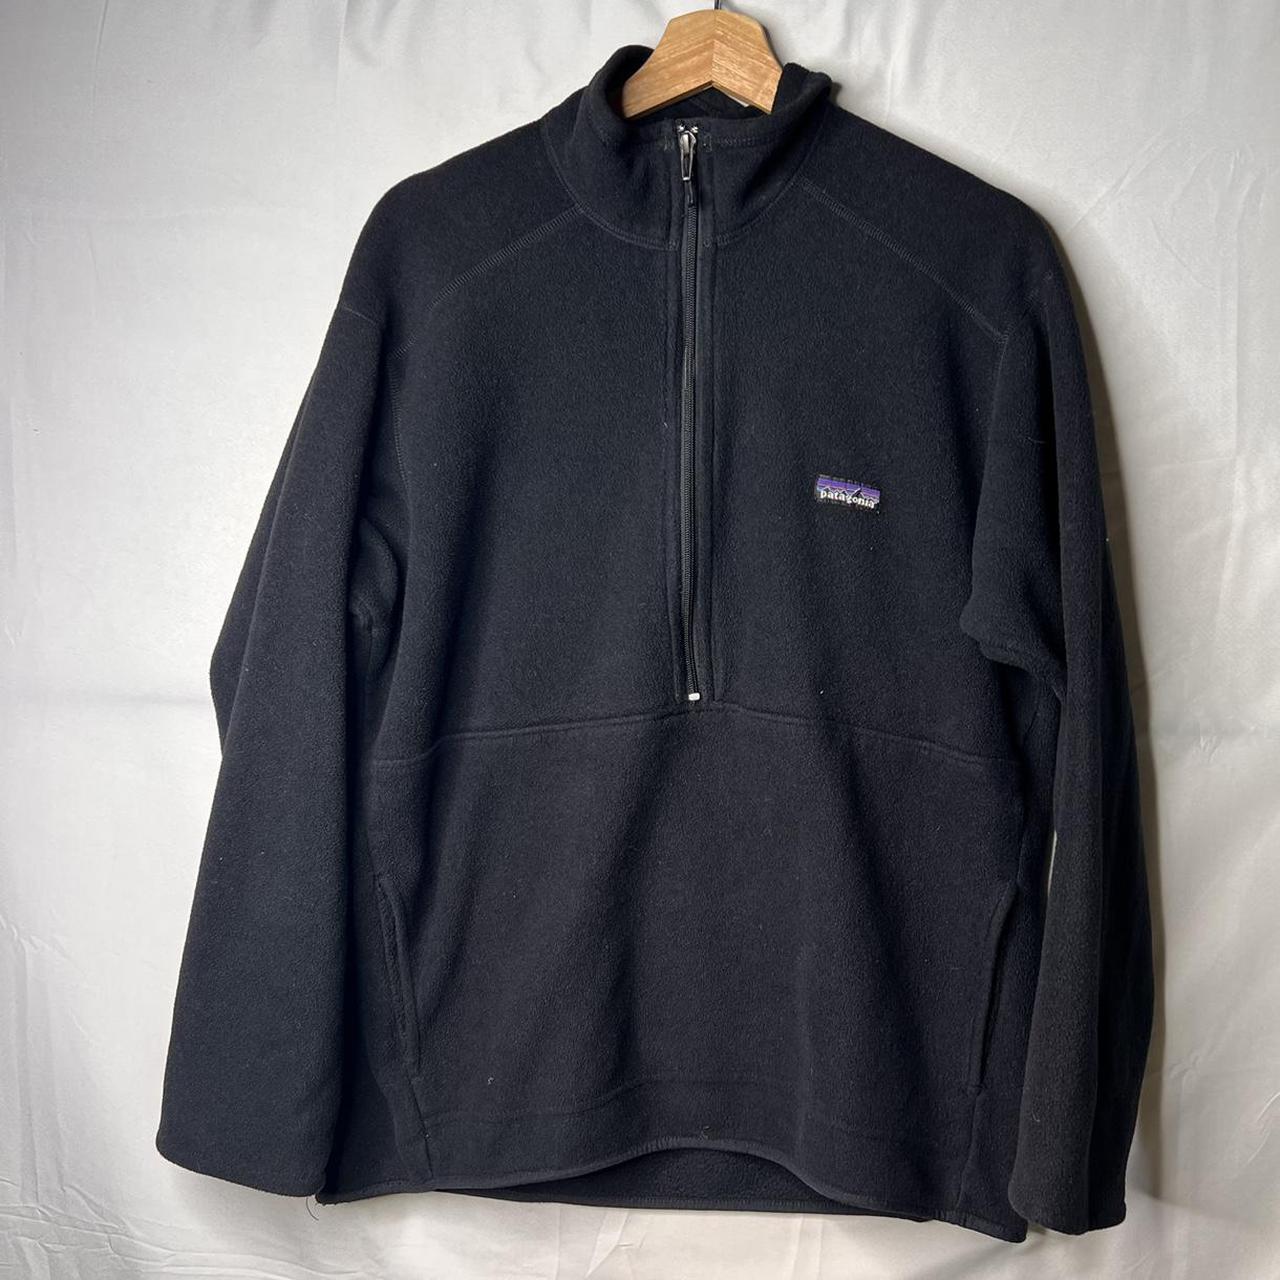 Product Image 1 - Vintage Patagonia Synchilla 

Size L.